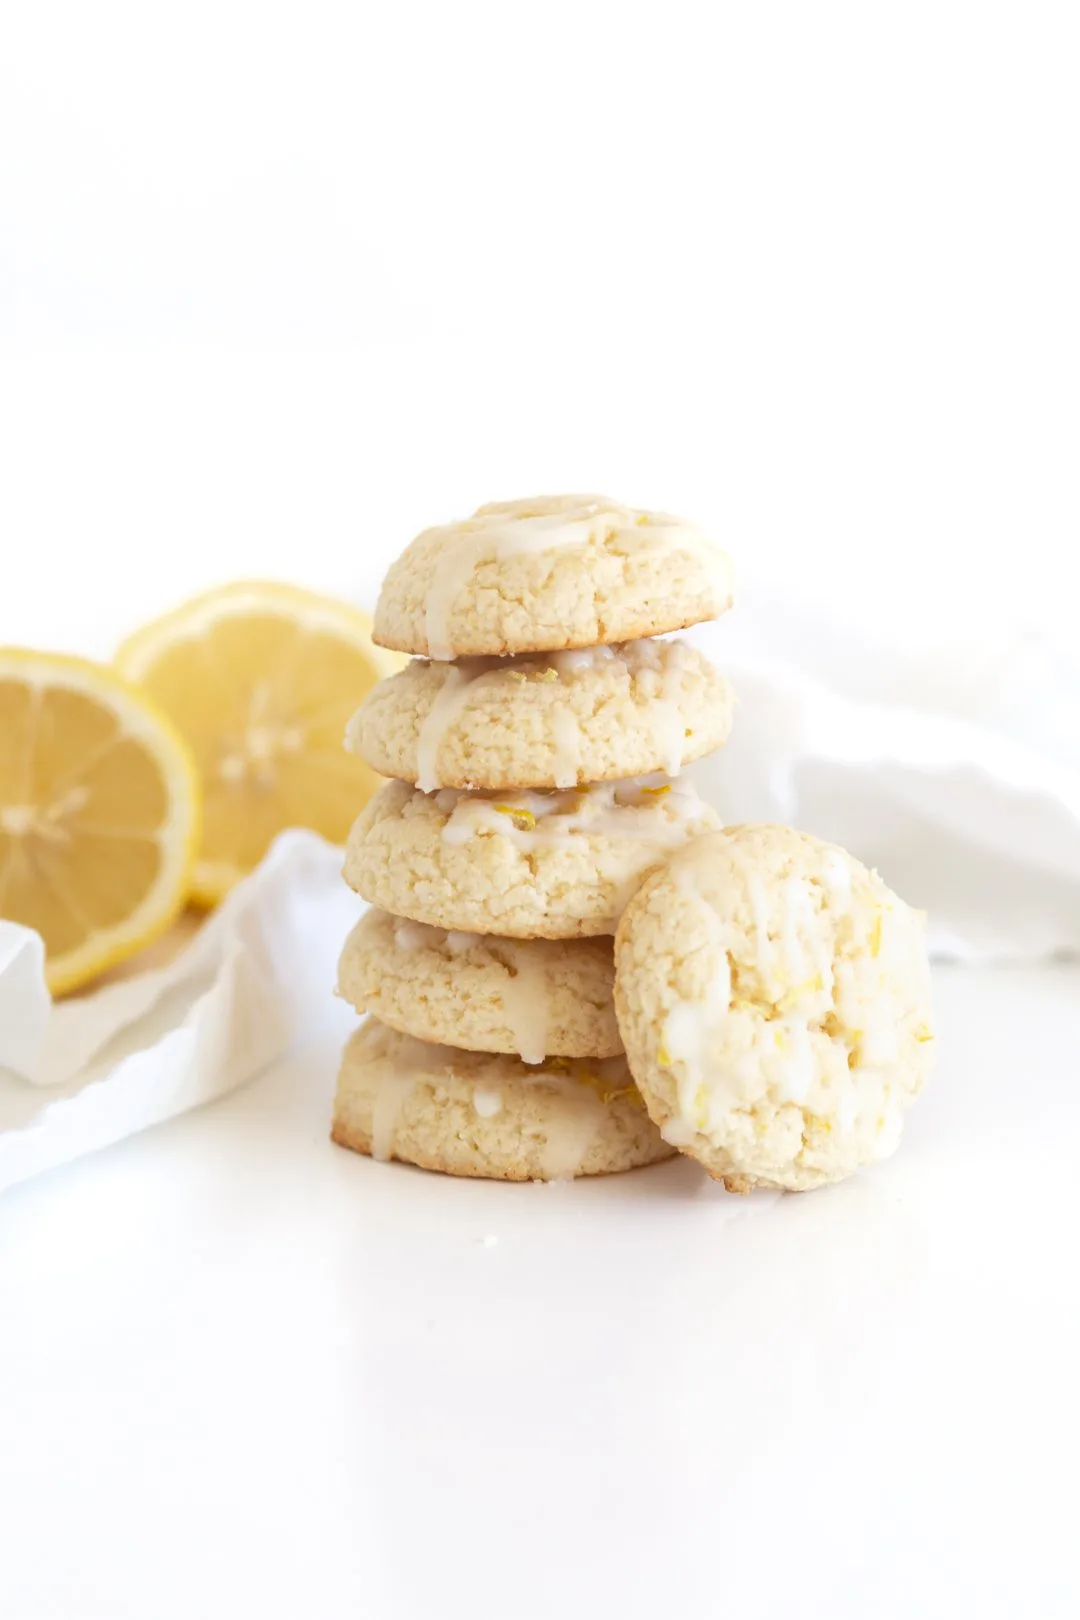 stack of five lemon cookies with an additional cookie leaning on the stalk. Halved lemons in the background.